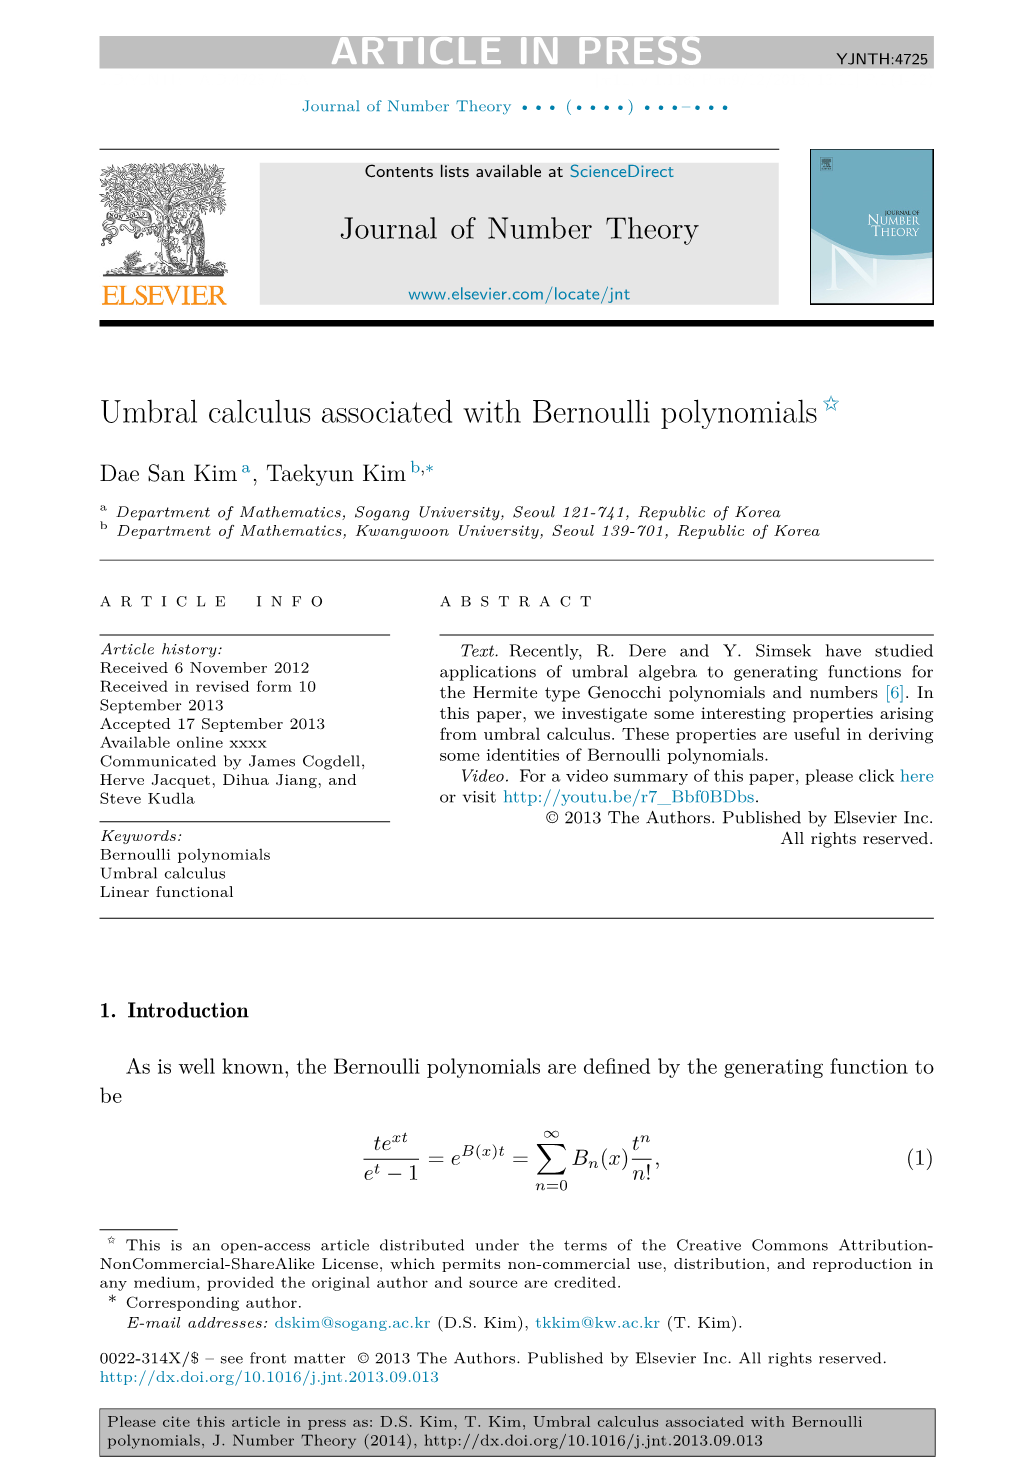 Umbral Calculus Associated with Bernoulli Polynomials ✩